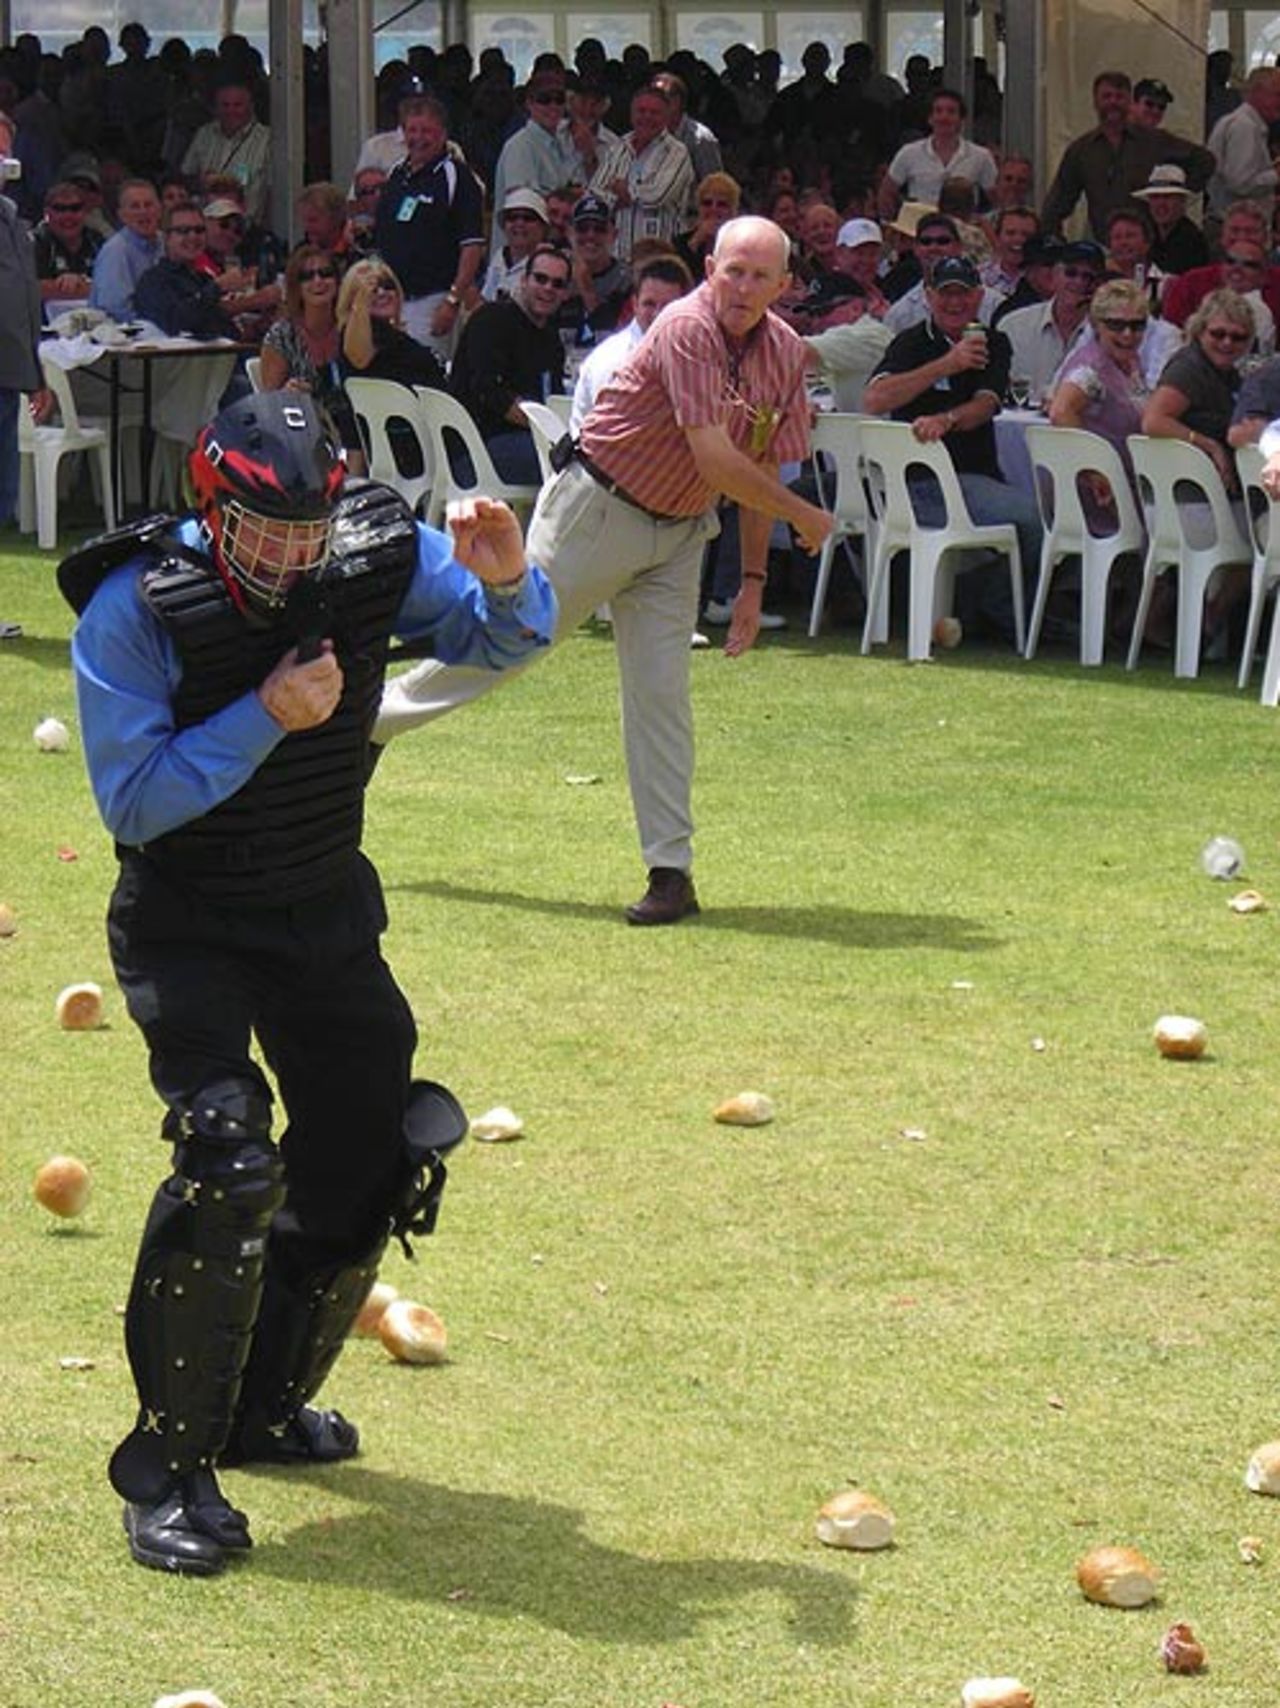 Roll with it: the fun and frivolity at the annual Lilac Hill festival match, Cricket Australia Chairman's XI v England XI, Lilac Hill, Perth, December 8, 2006